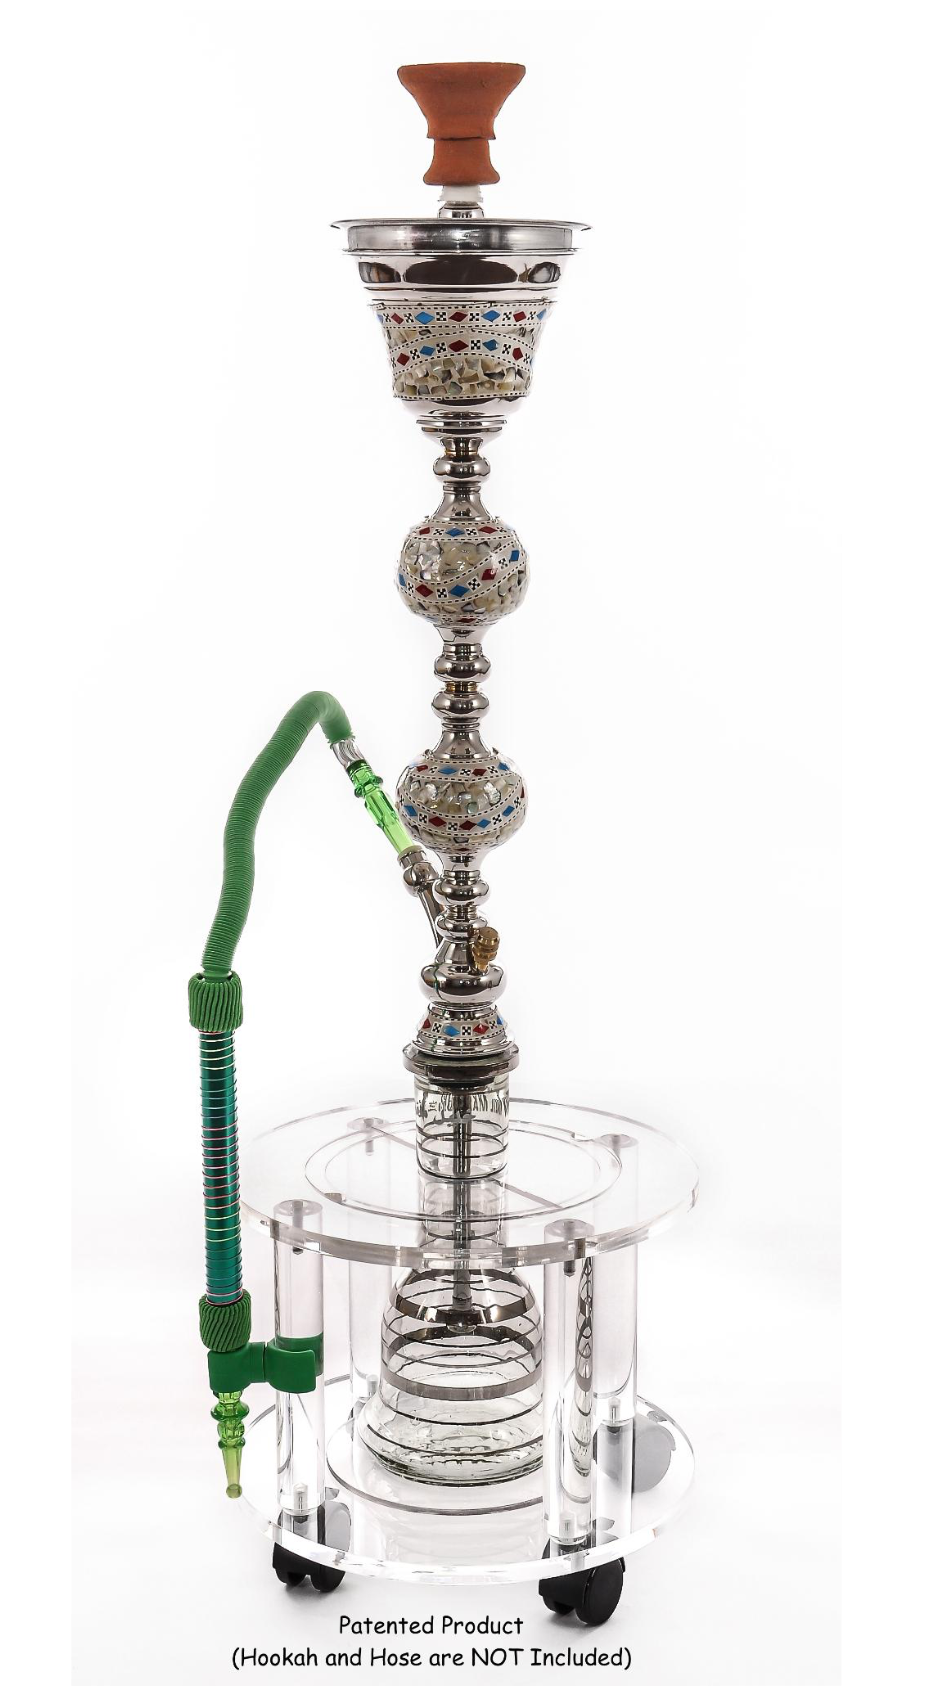 Hookah Stands Turtle, Extra Thick, to Protect Hooka from Falling Over, Clear Acrylic Furniture, Table with Wheels & Brakes, Hookah Accessories for Home and Cafe, Secure Shisha, Stop Burnt Carpets